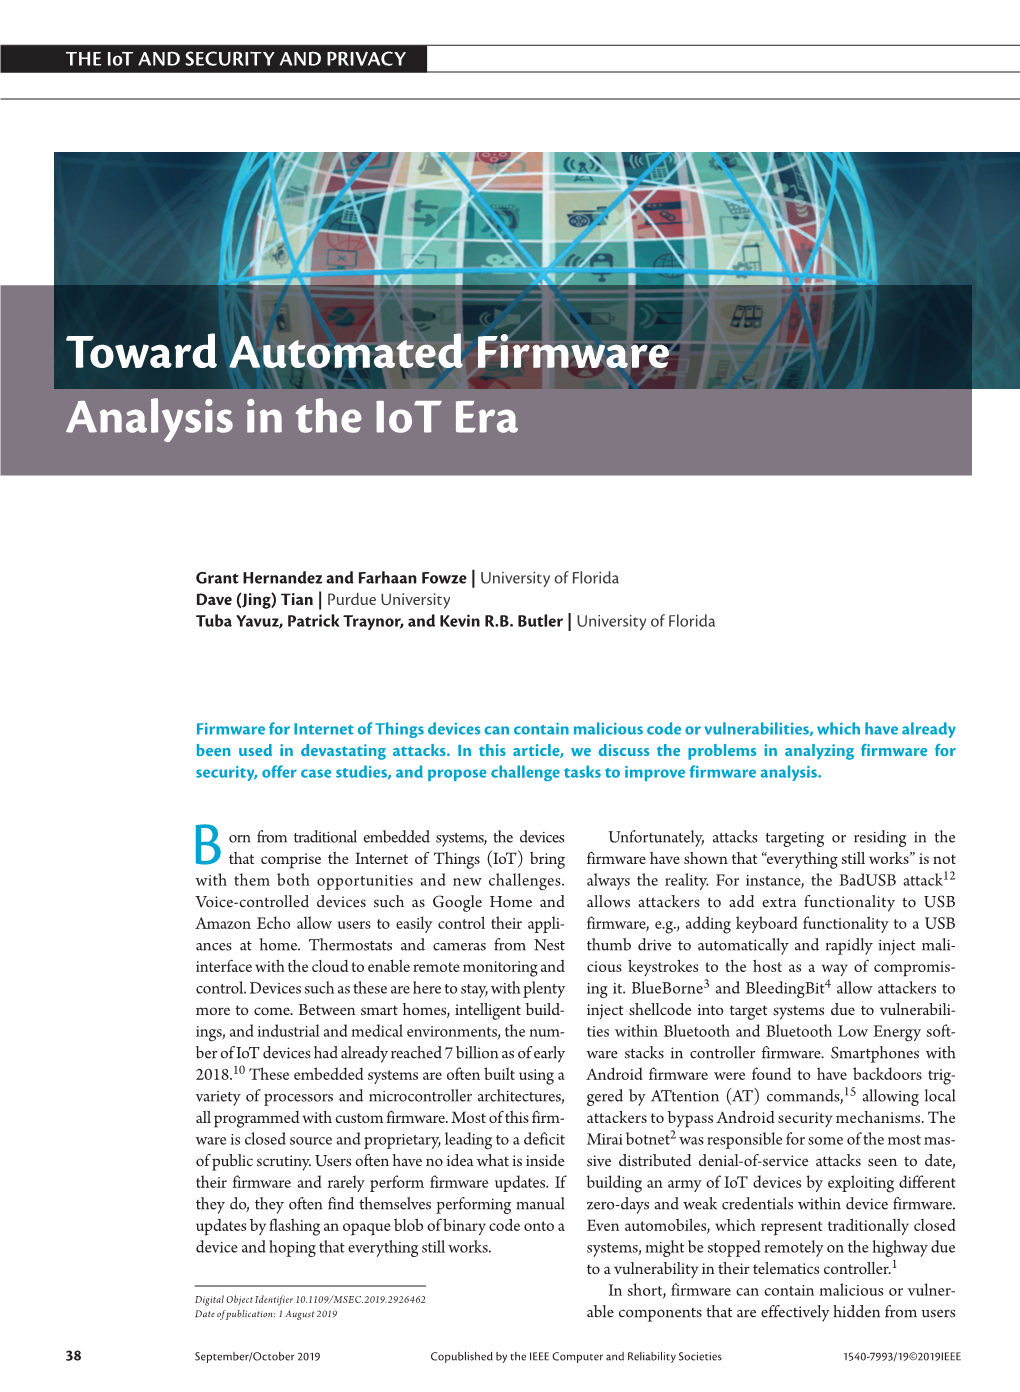 Toward Automated Firmware Analysis in the Iot Era